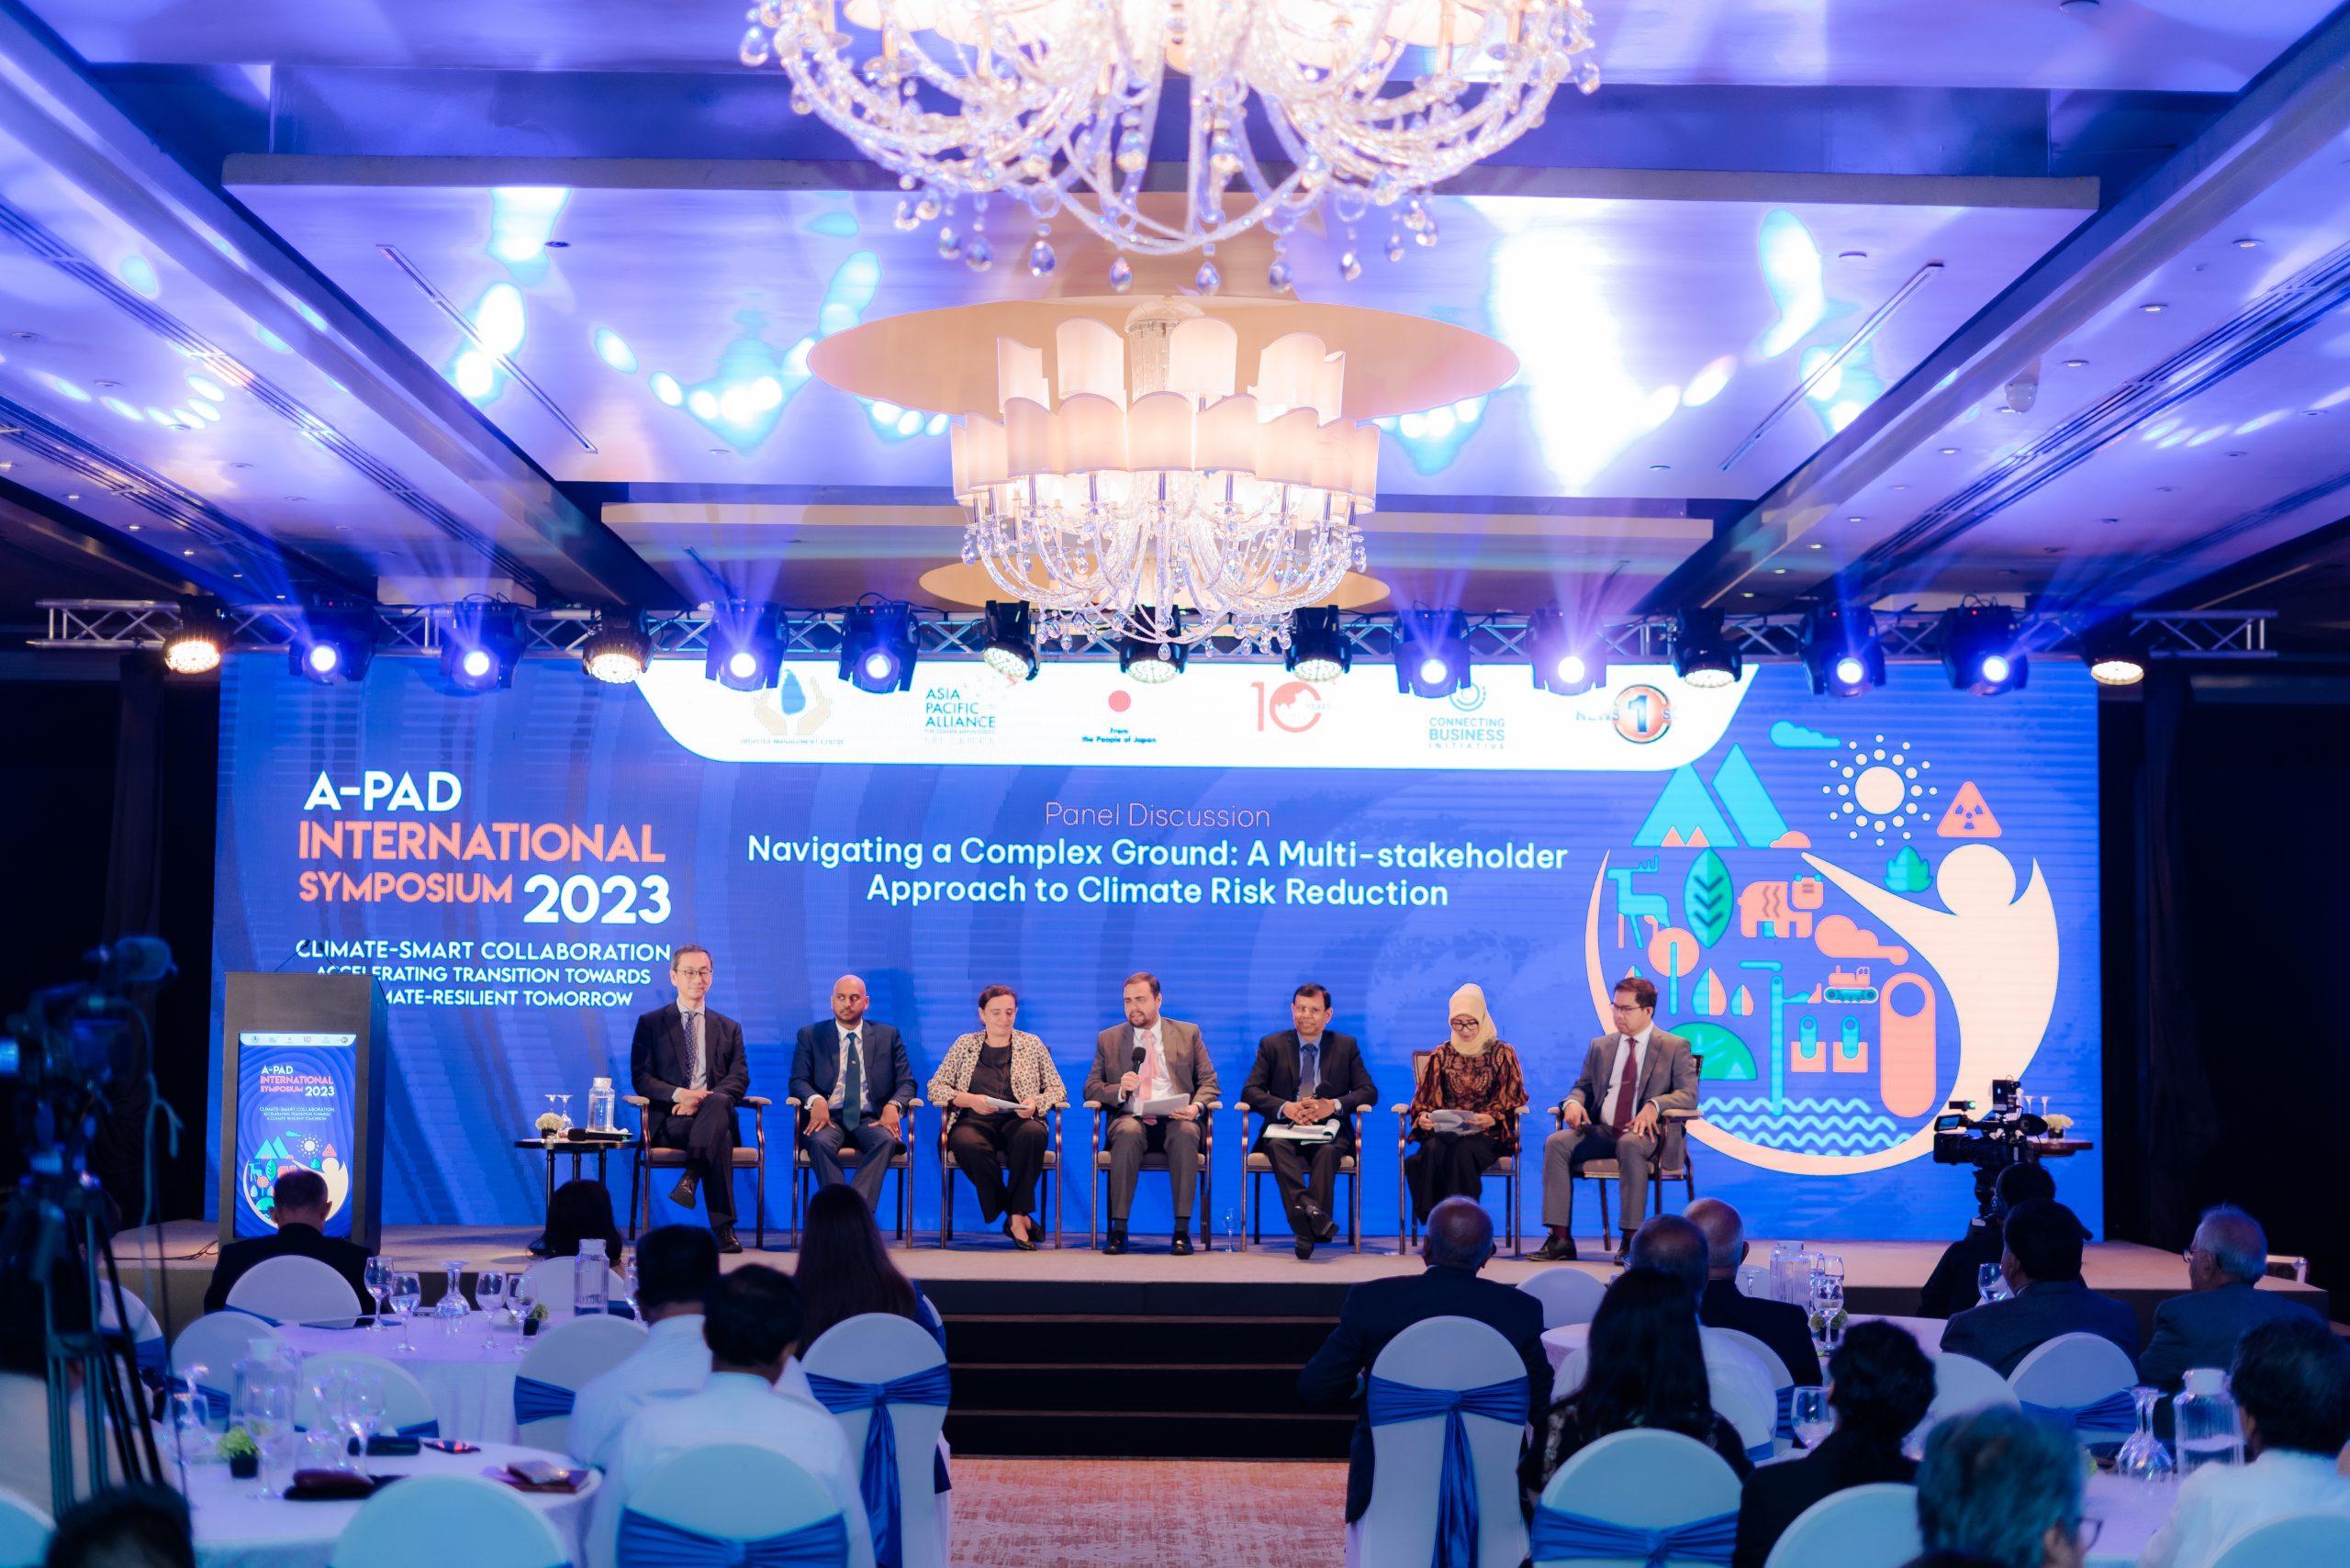 A-PAD Sri Lanka Convenes International Symposium to Drive Climate-Smart Collaboration for a Climate-Resilient Tomorrow